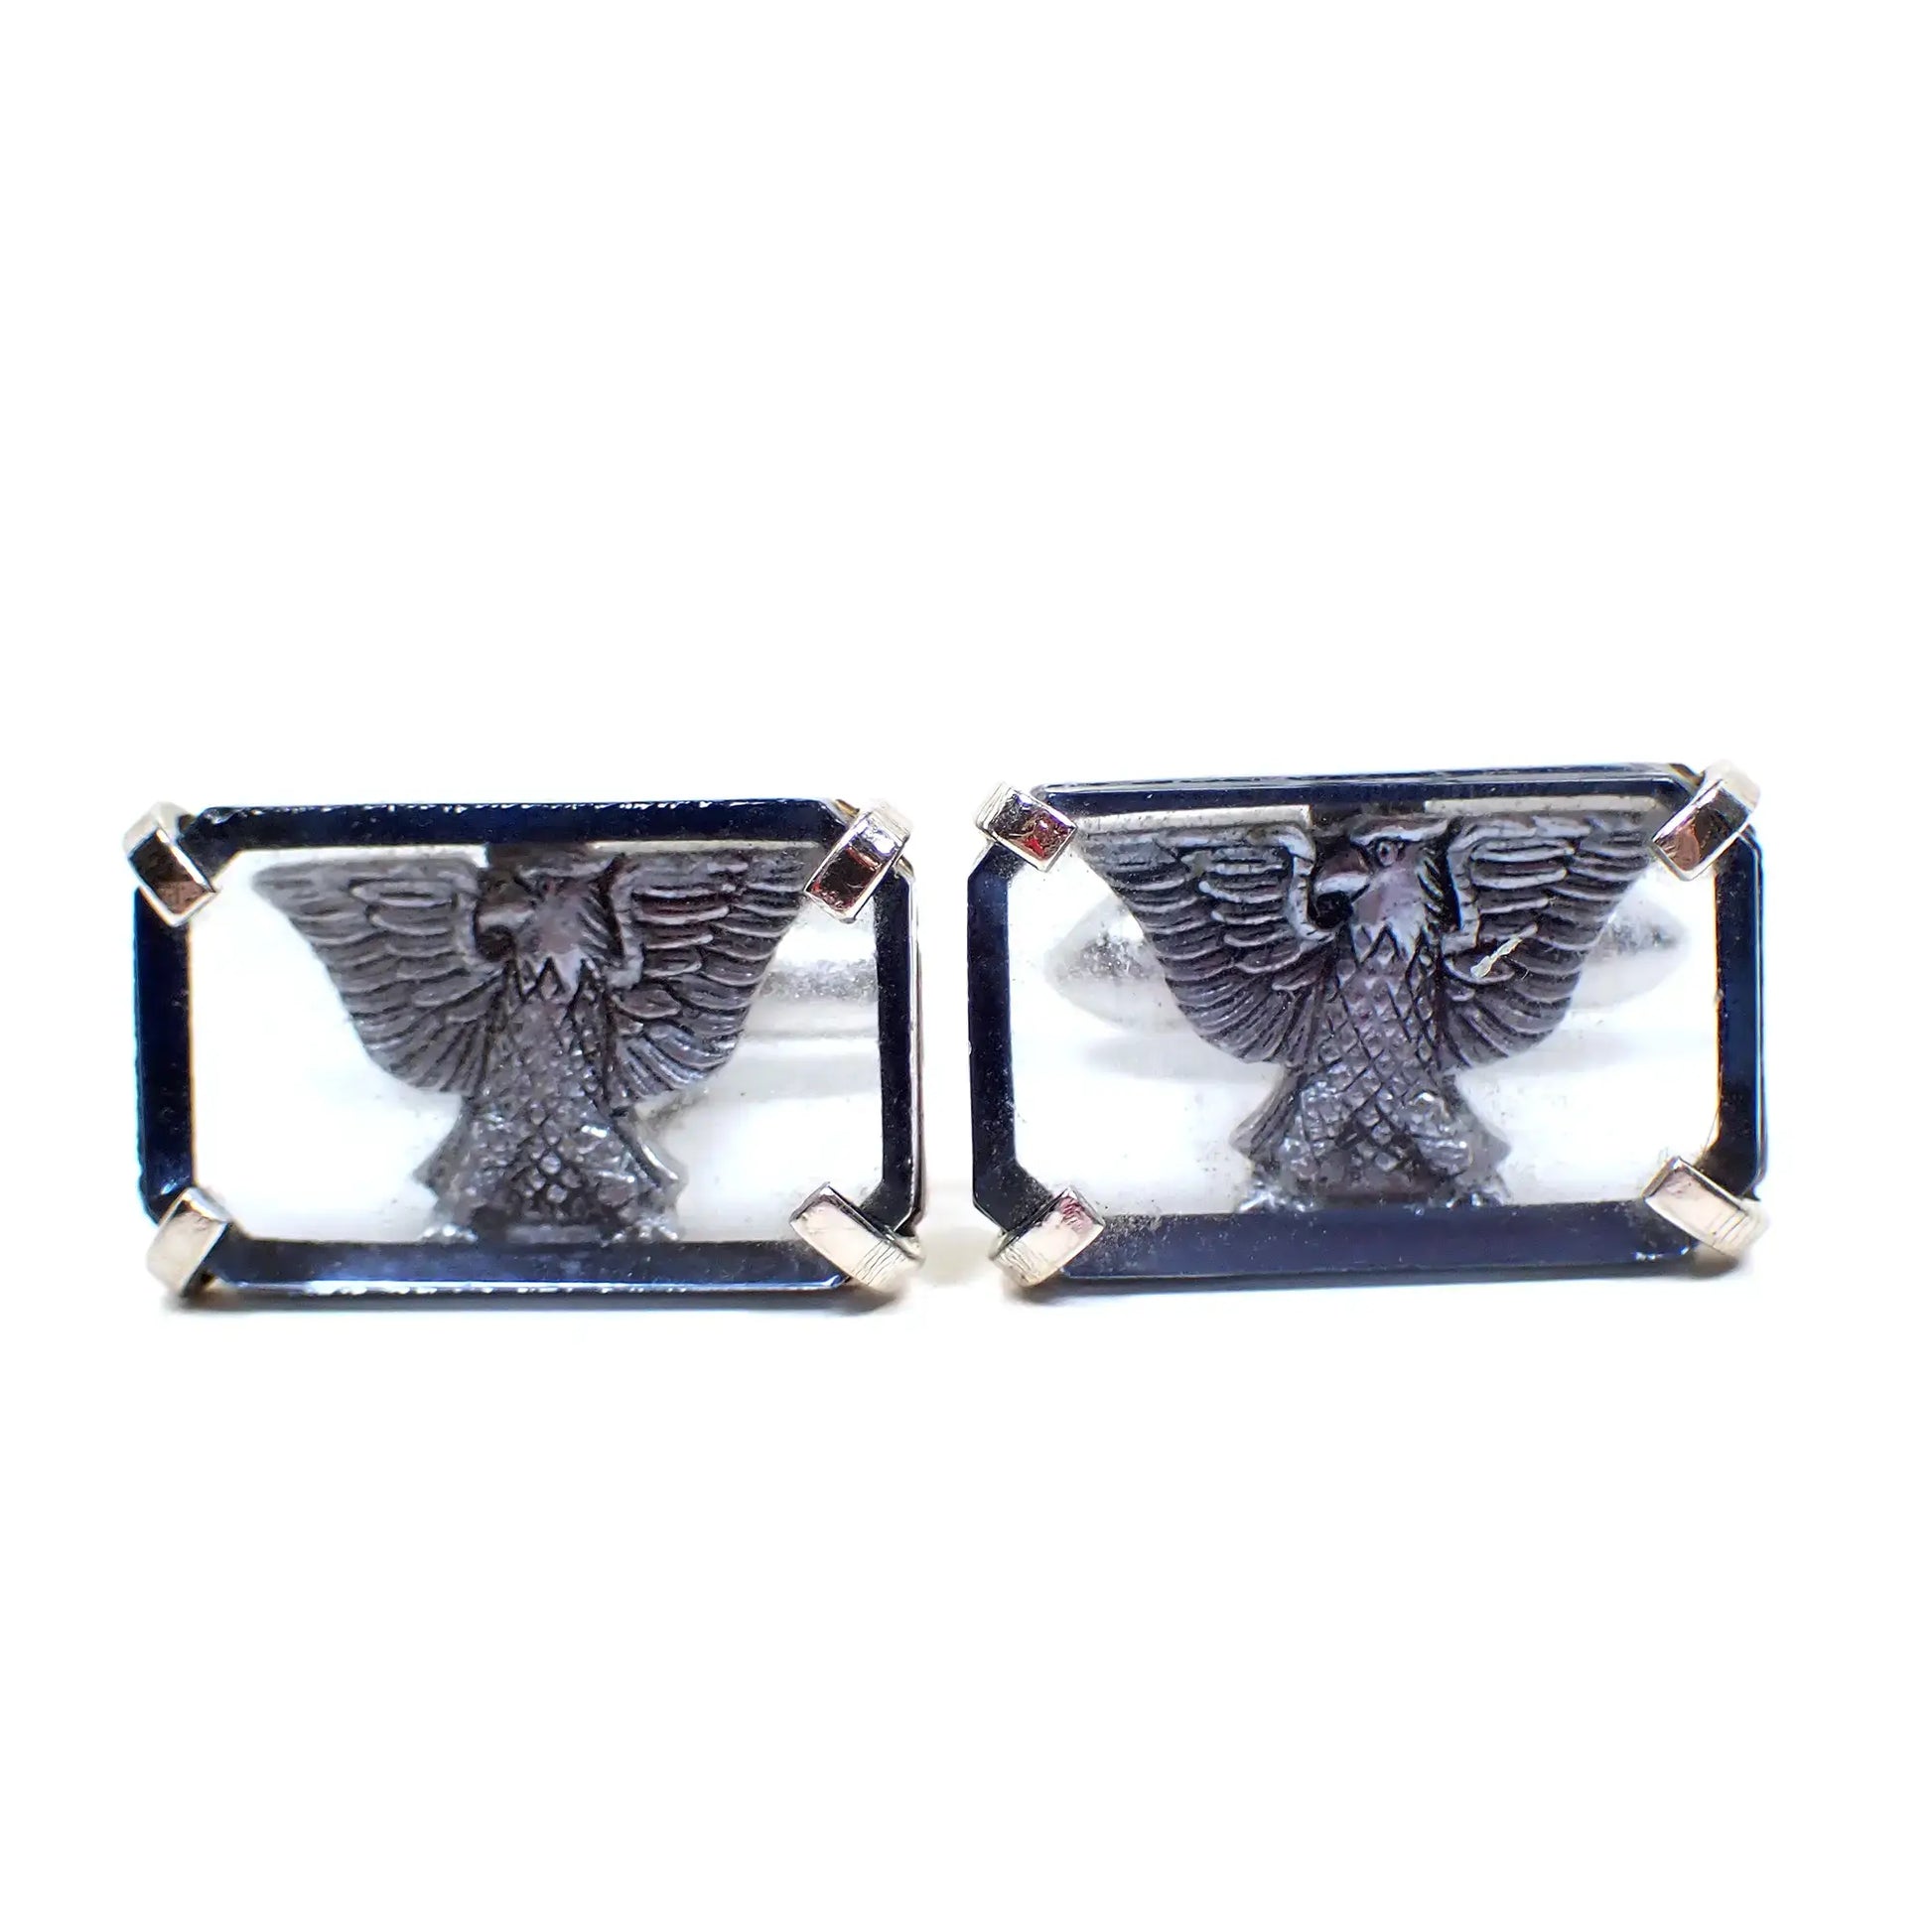 Front view of the retro vintage Swank cufflinks. The metal is silver tone in color. They are shaped like rectangles and have a transparent blue glass front with a silver tone eagle design behind it. The eagle has his wings spread.